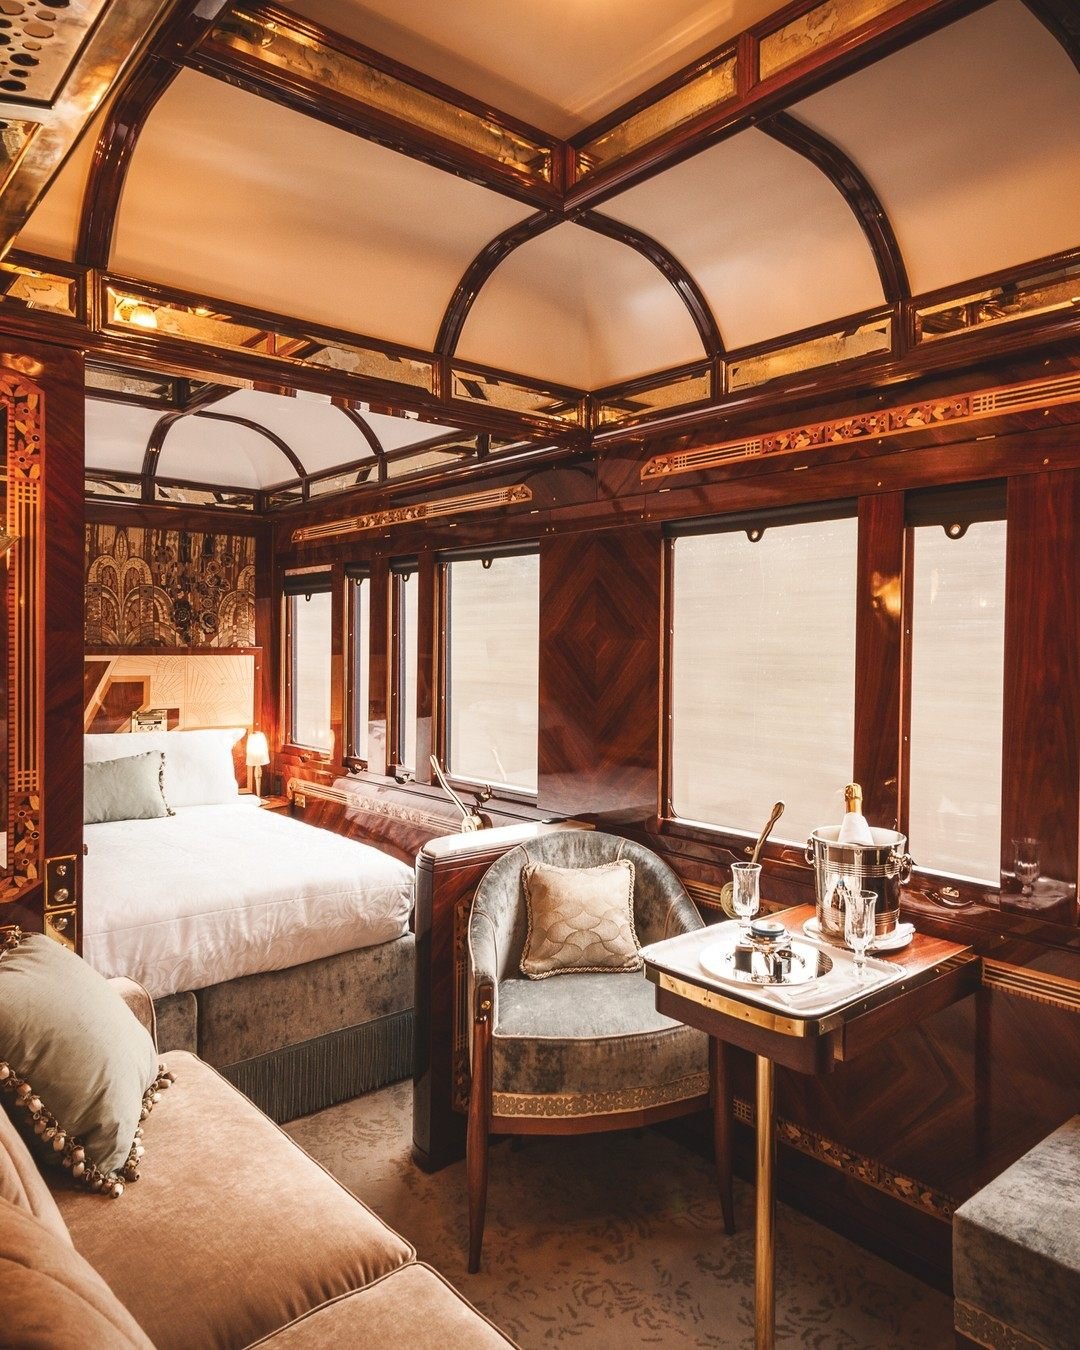 Belmond’s Venice-Simplon Orient Express is a luxurious and green alternative to flying, for those who wish to travel in style. Photo: @vsoetrain/Instagram